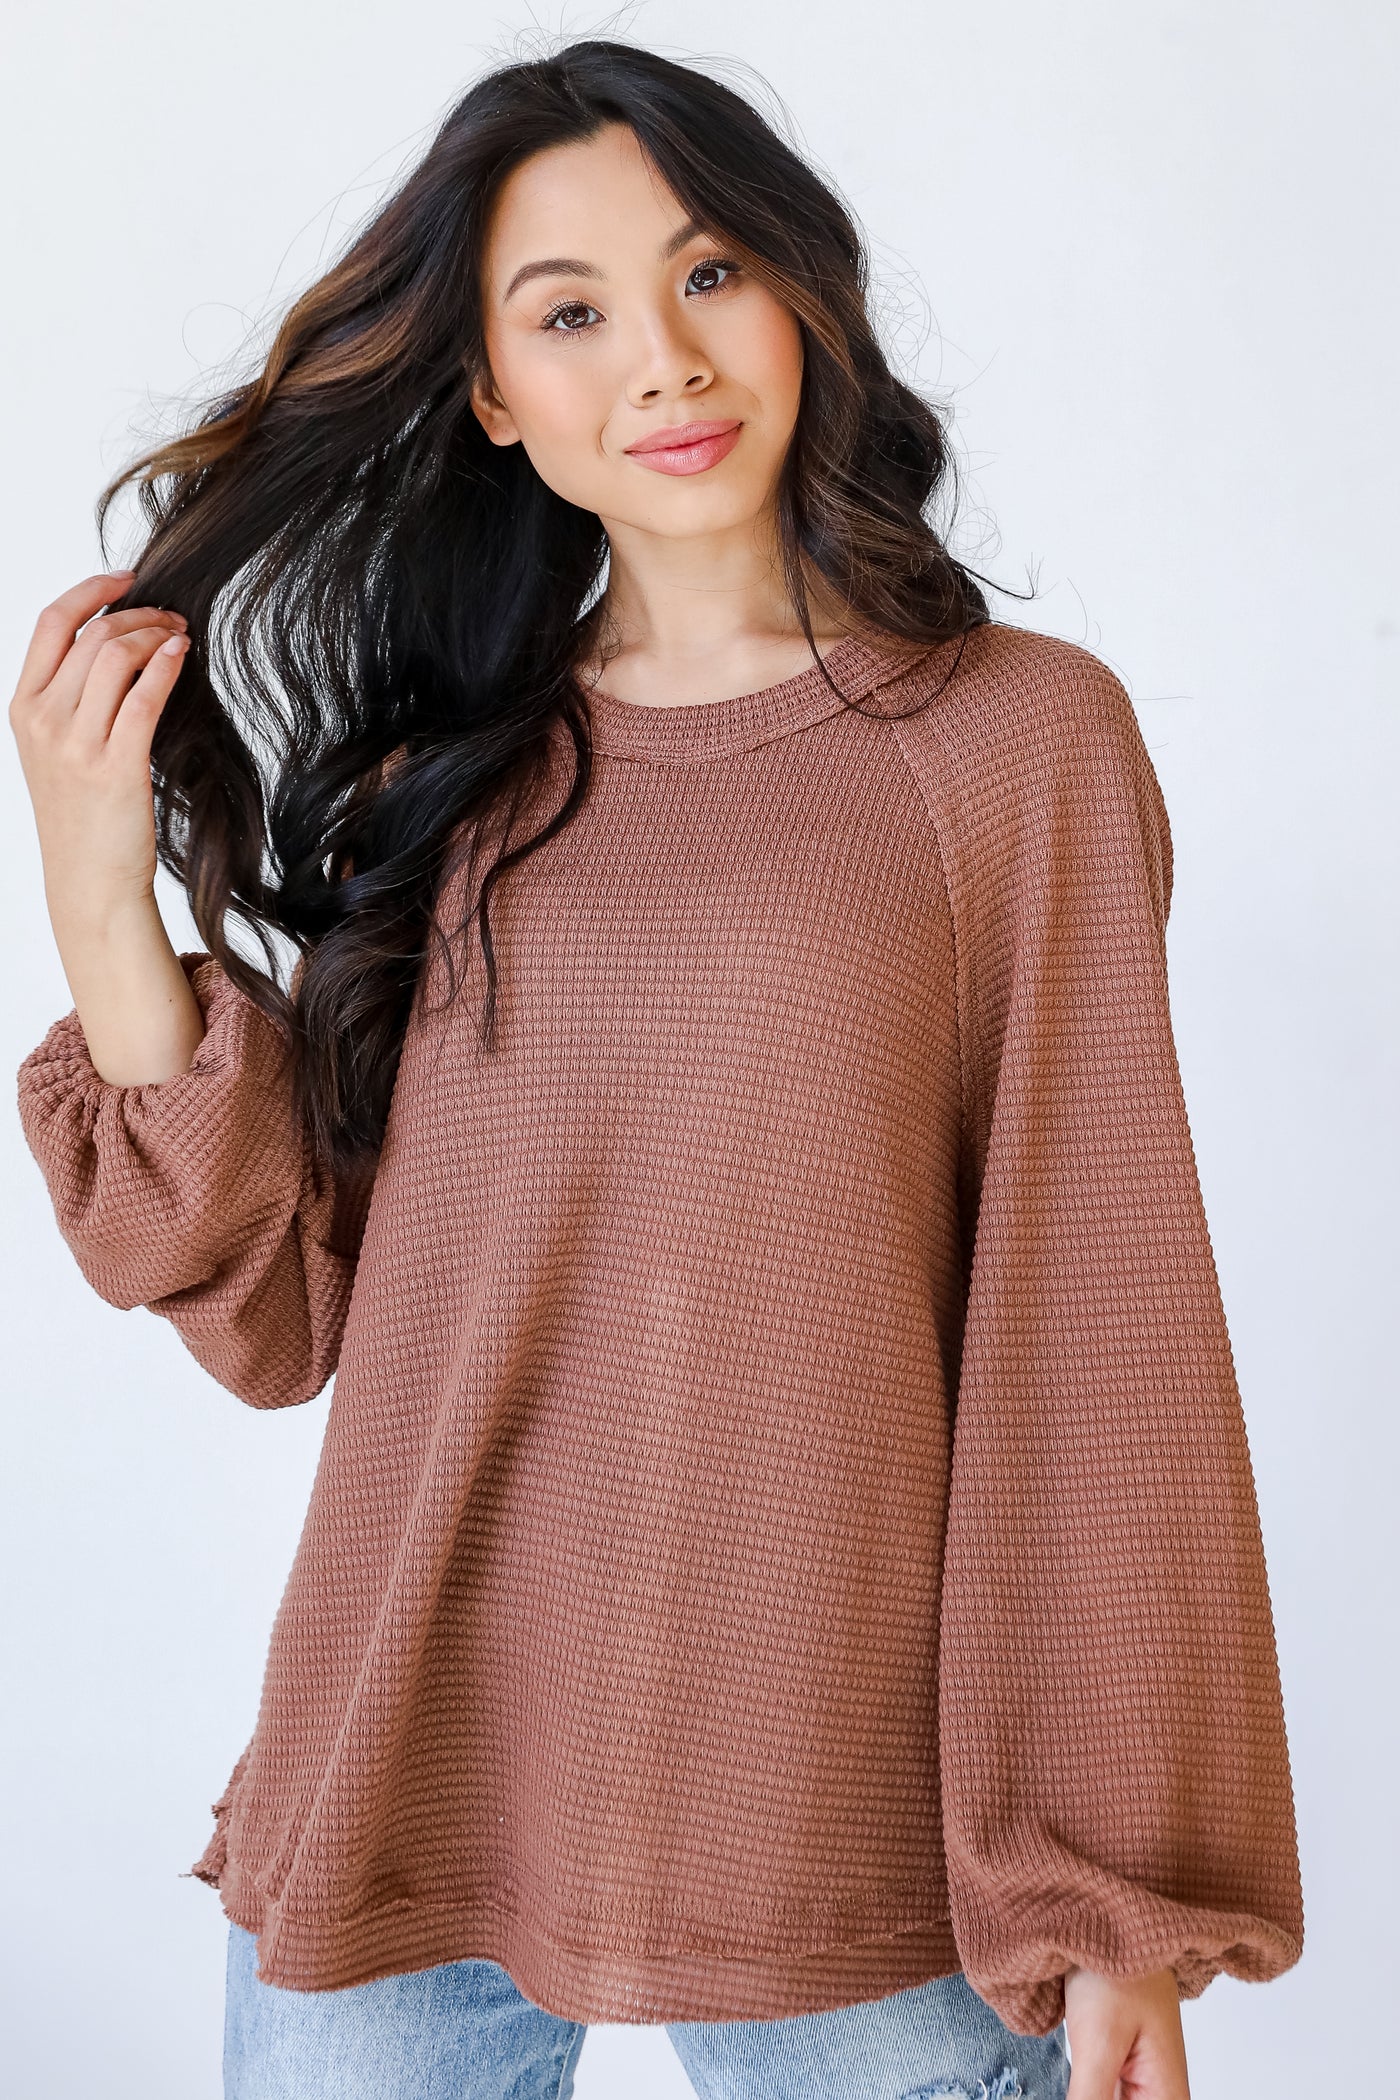 Waffle Knit Top in mocha front view